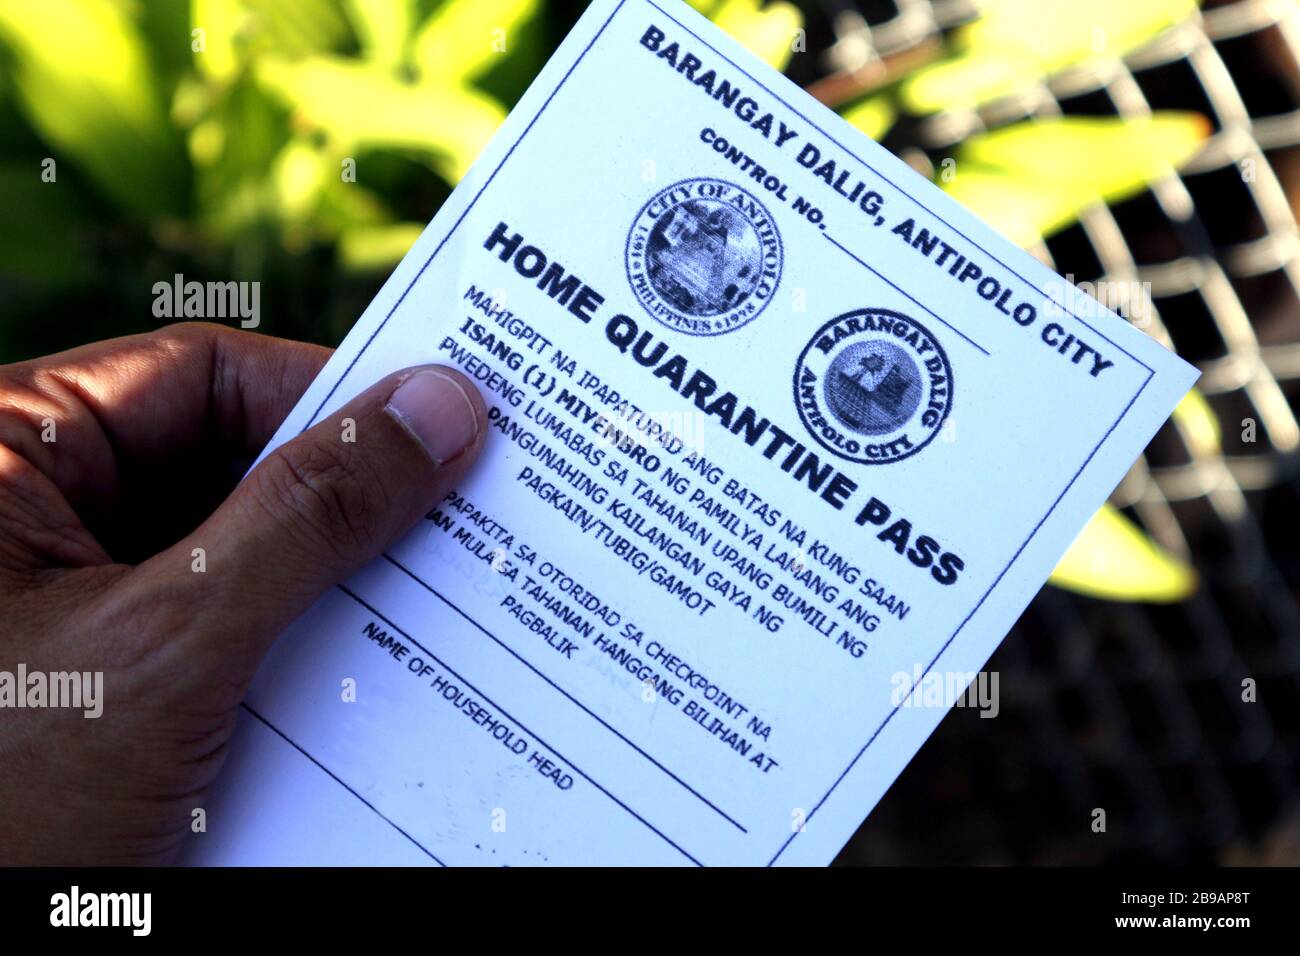 Antipolo City, Philippines - March 21, 2020: Home Quarantine Pass of a family member issued by local government during the Enhanced Community Quaranti Stock Photo